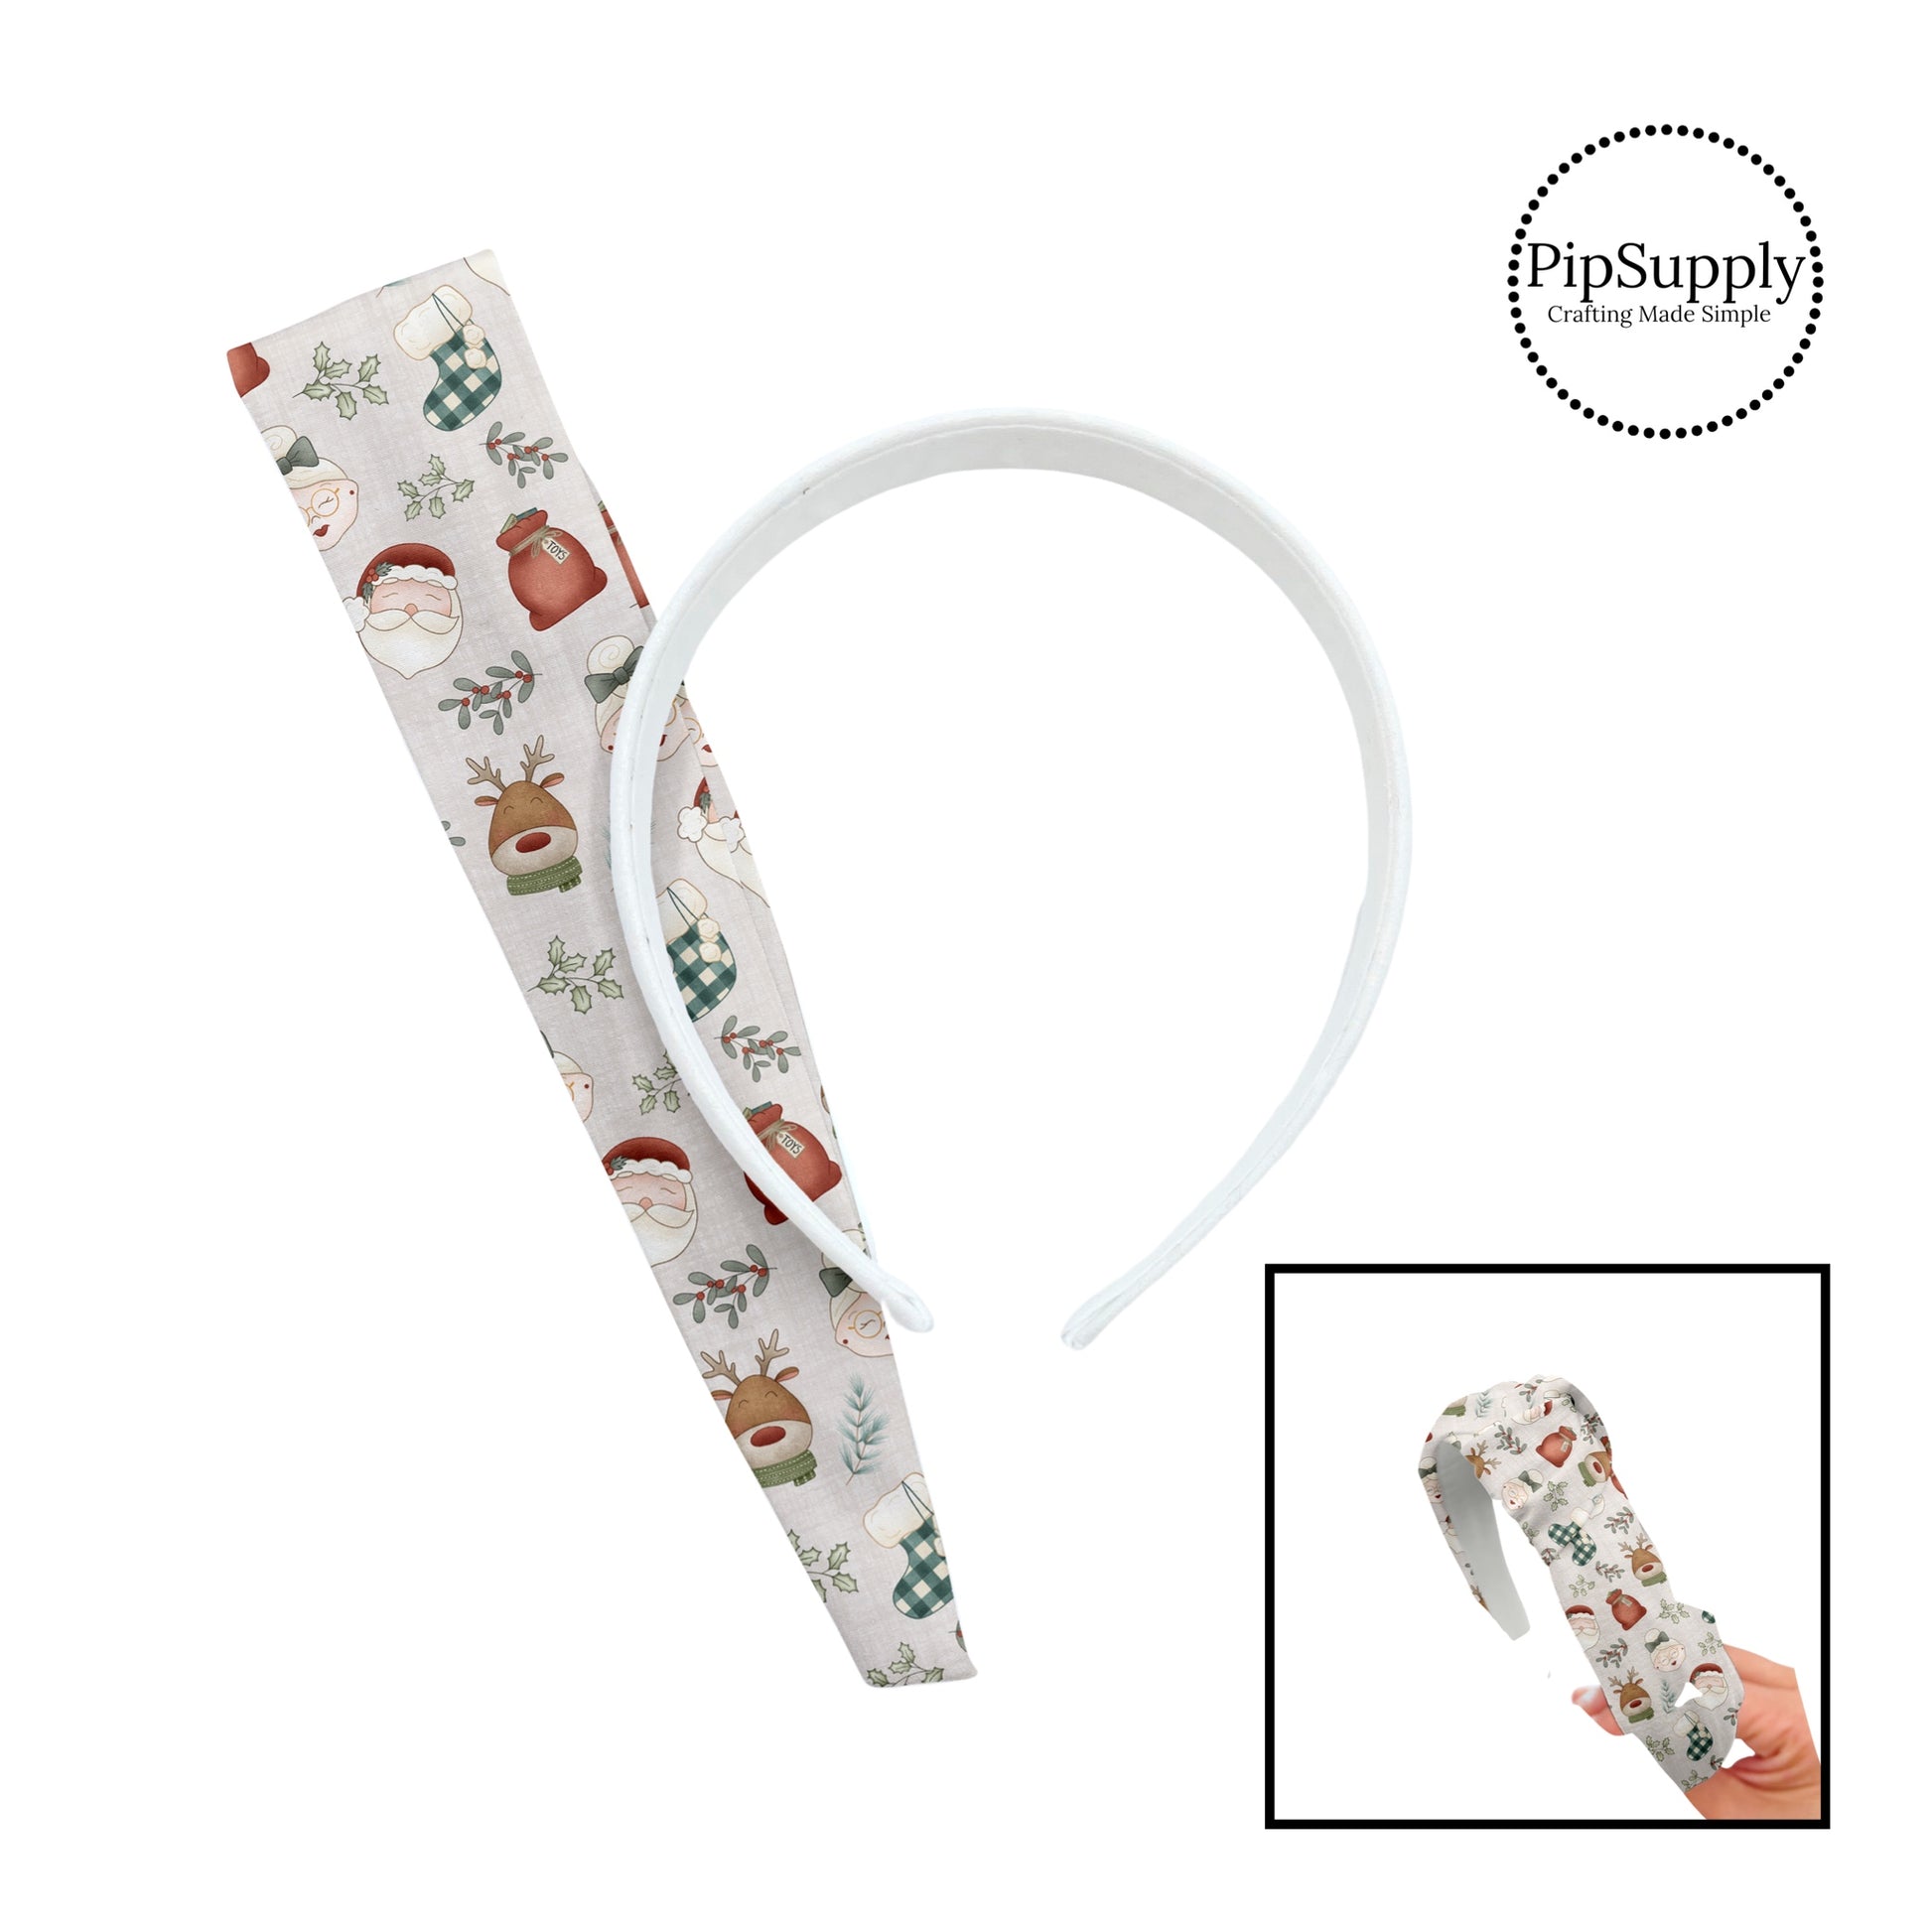 Mr. And Mrs. Claus Christmas Pattern DIY Knotted Headband Kit - A